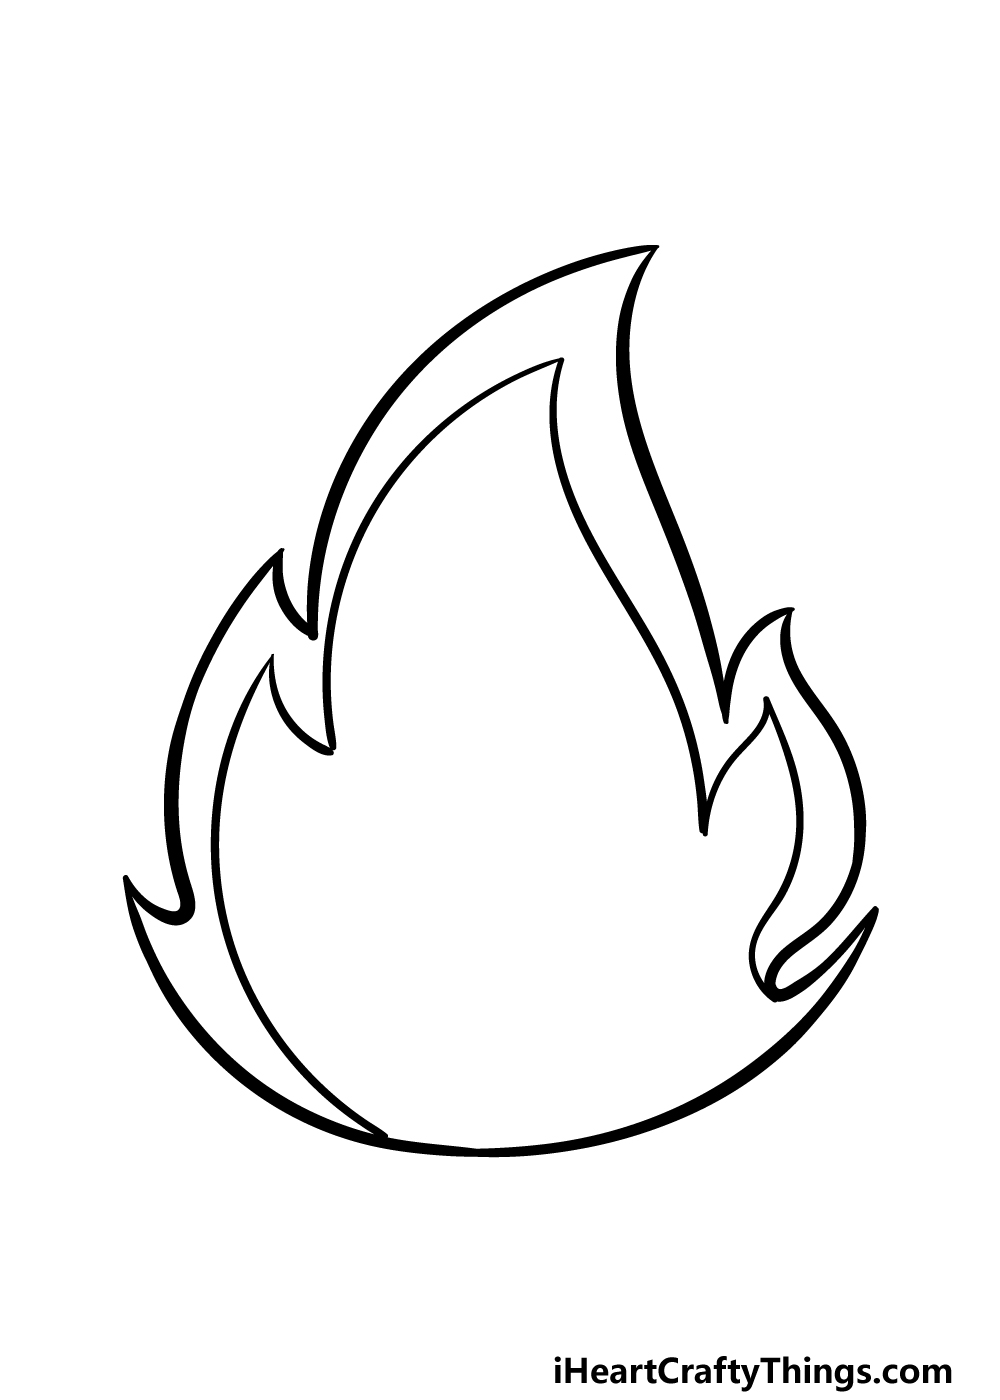 Cartoon Flame Drawing - How To Draw A Cartoon Flame Step By Step